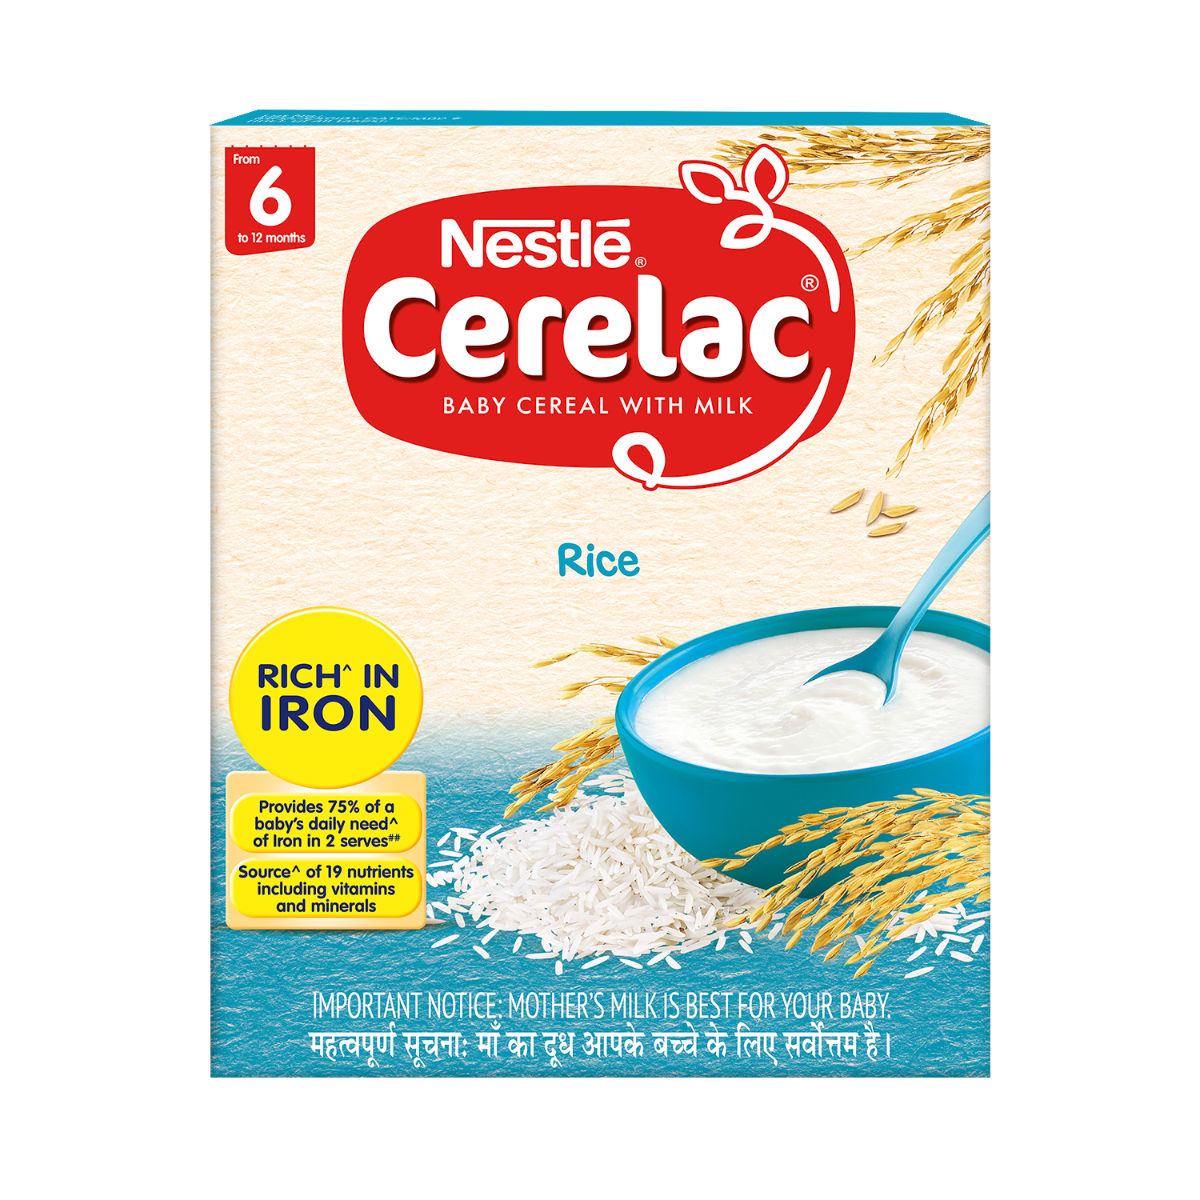 Buy Nestle Cerelac Rice Baby Cereal, 6 to 12 Months, 300 gm Refill Pack Online